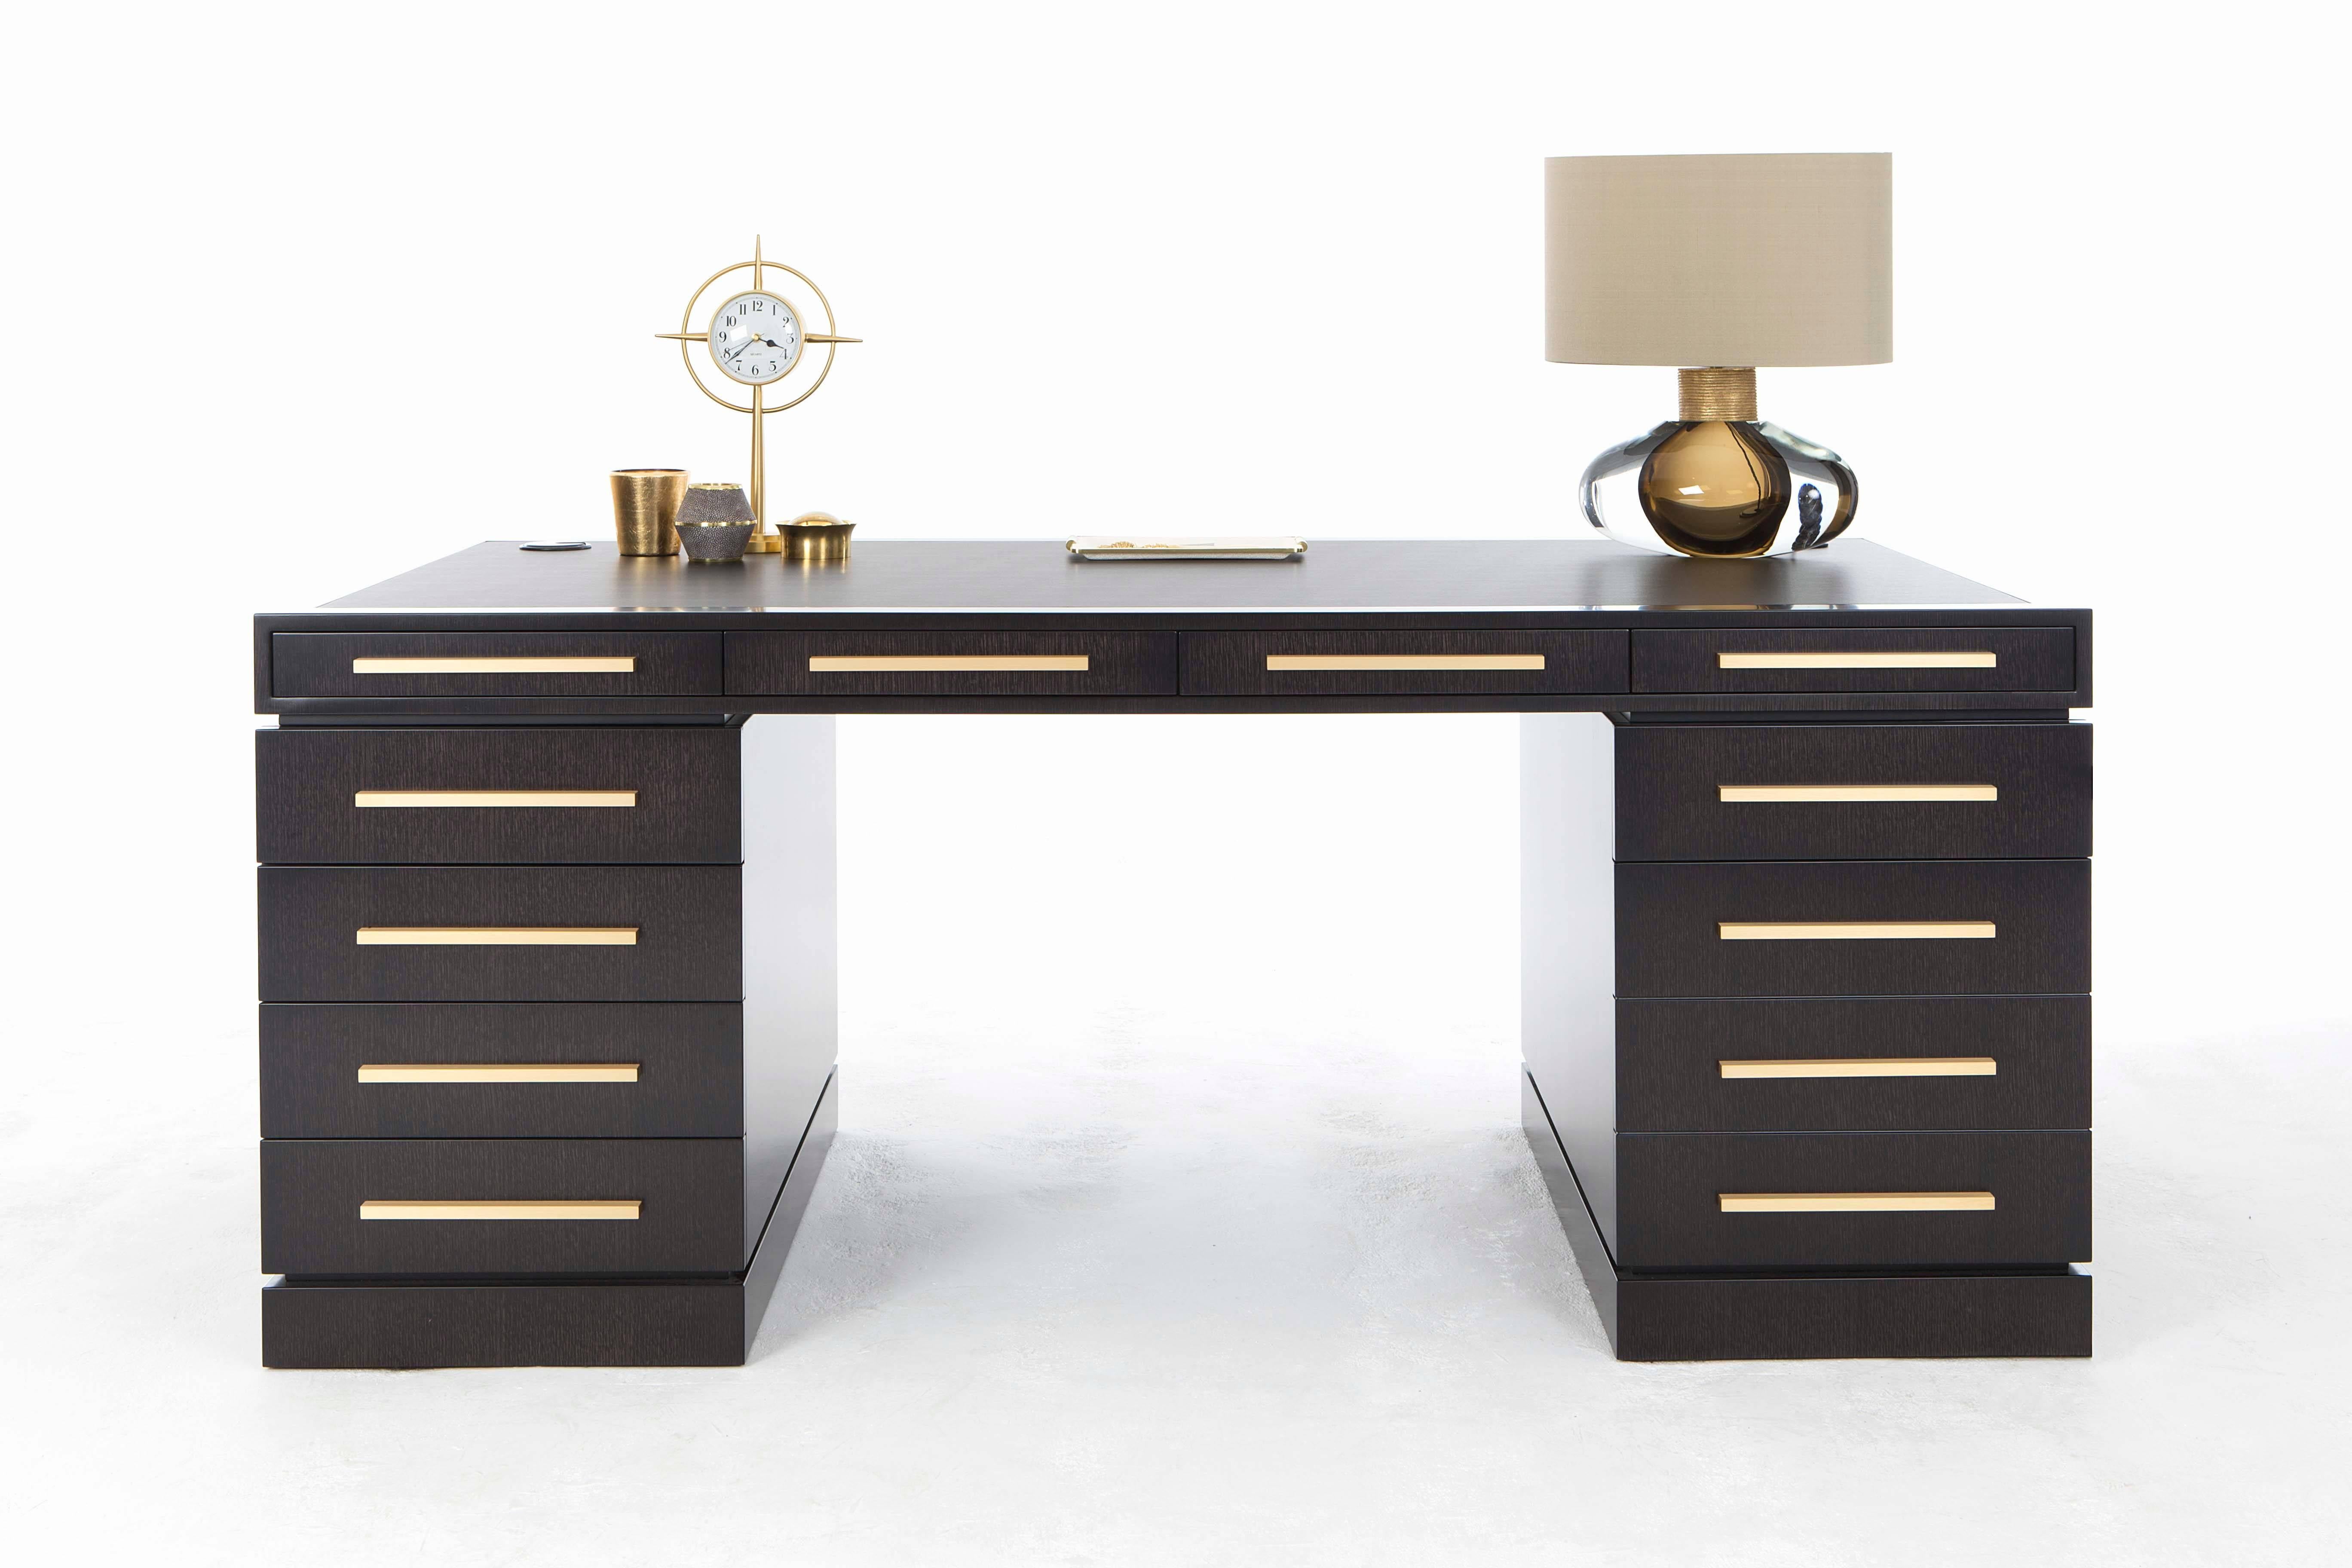 An ultra-glamorous writing desk finished in satin dark tinted oak with handles finished in brushed brass.

Be bold with this smart writing desk with an inset leather writing surface and ample storage to house all those office essentials. The left